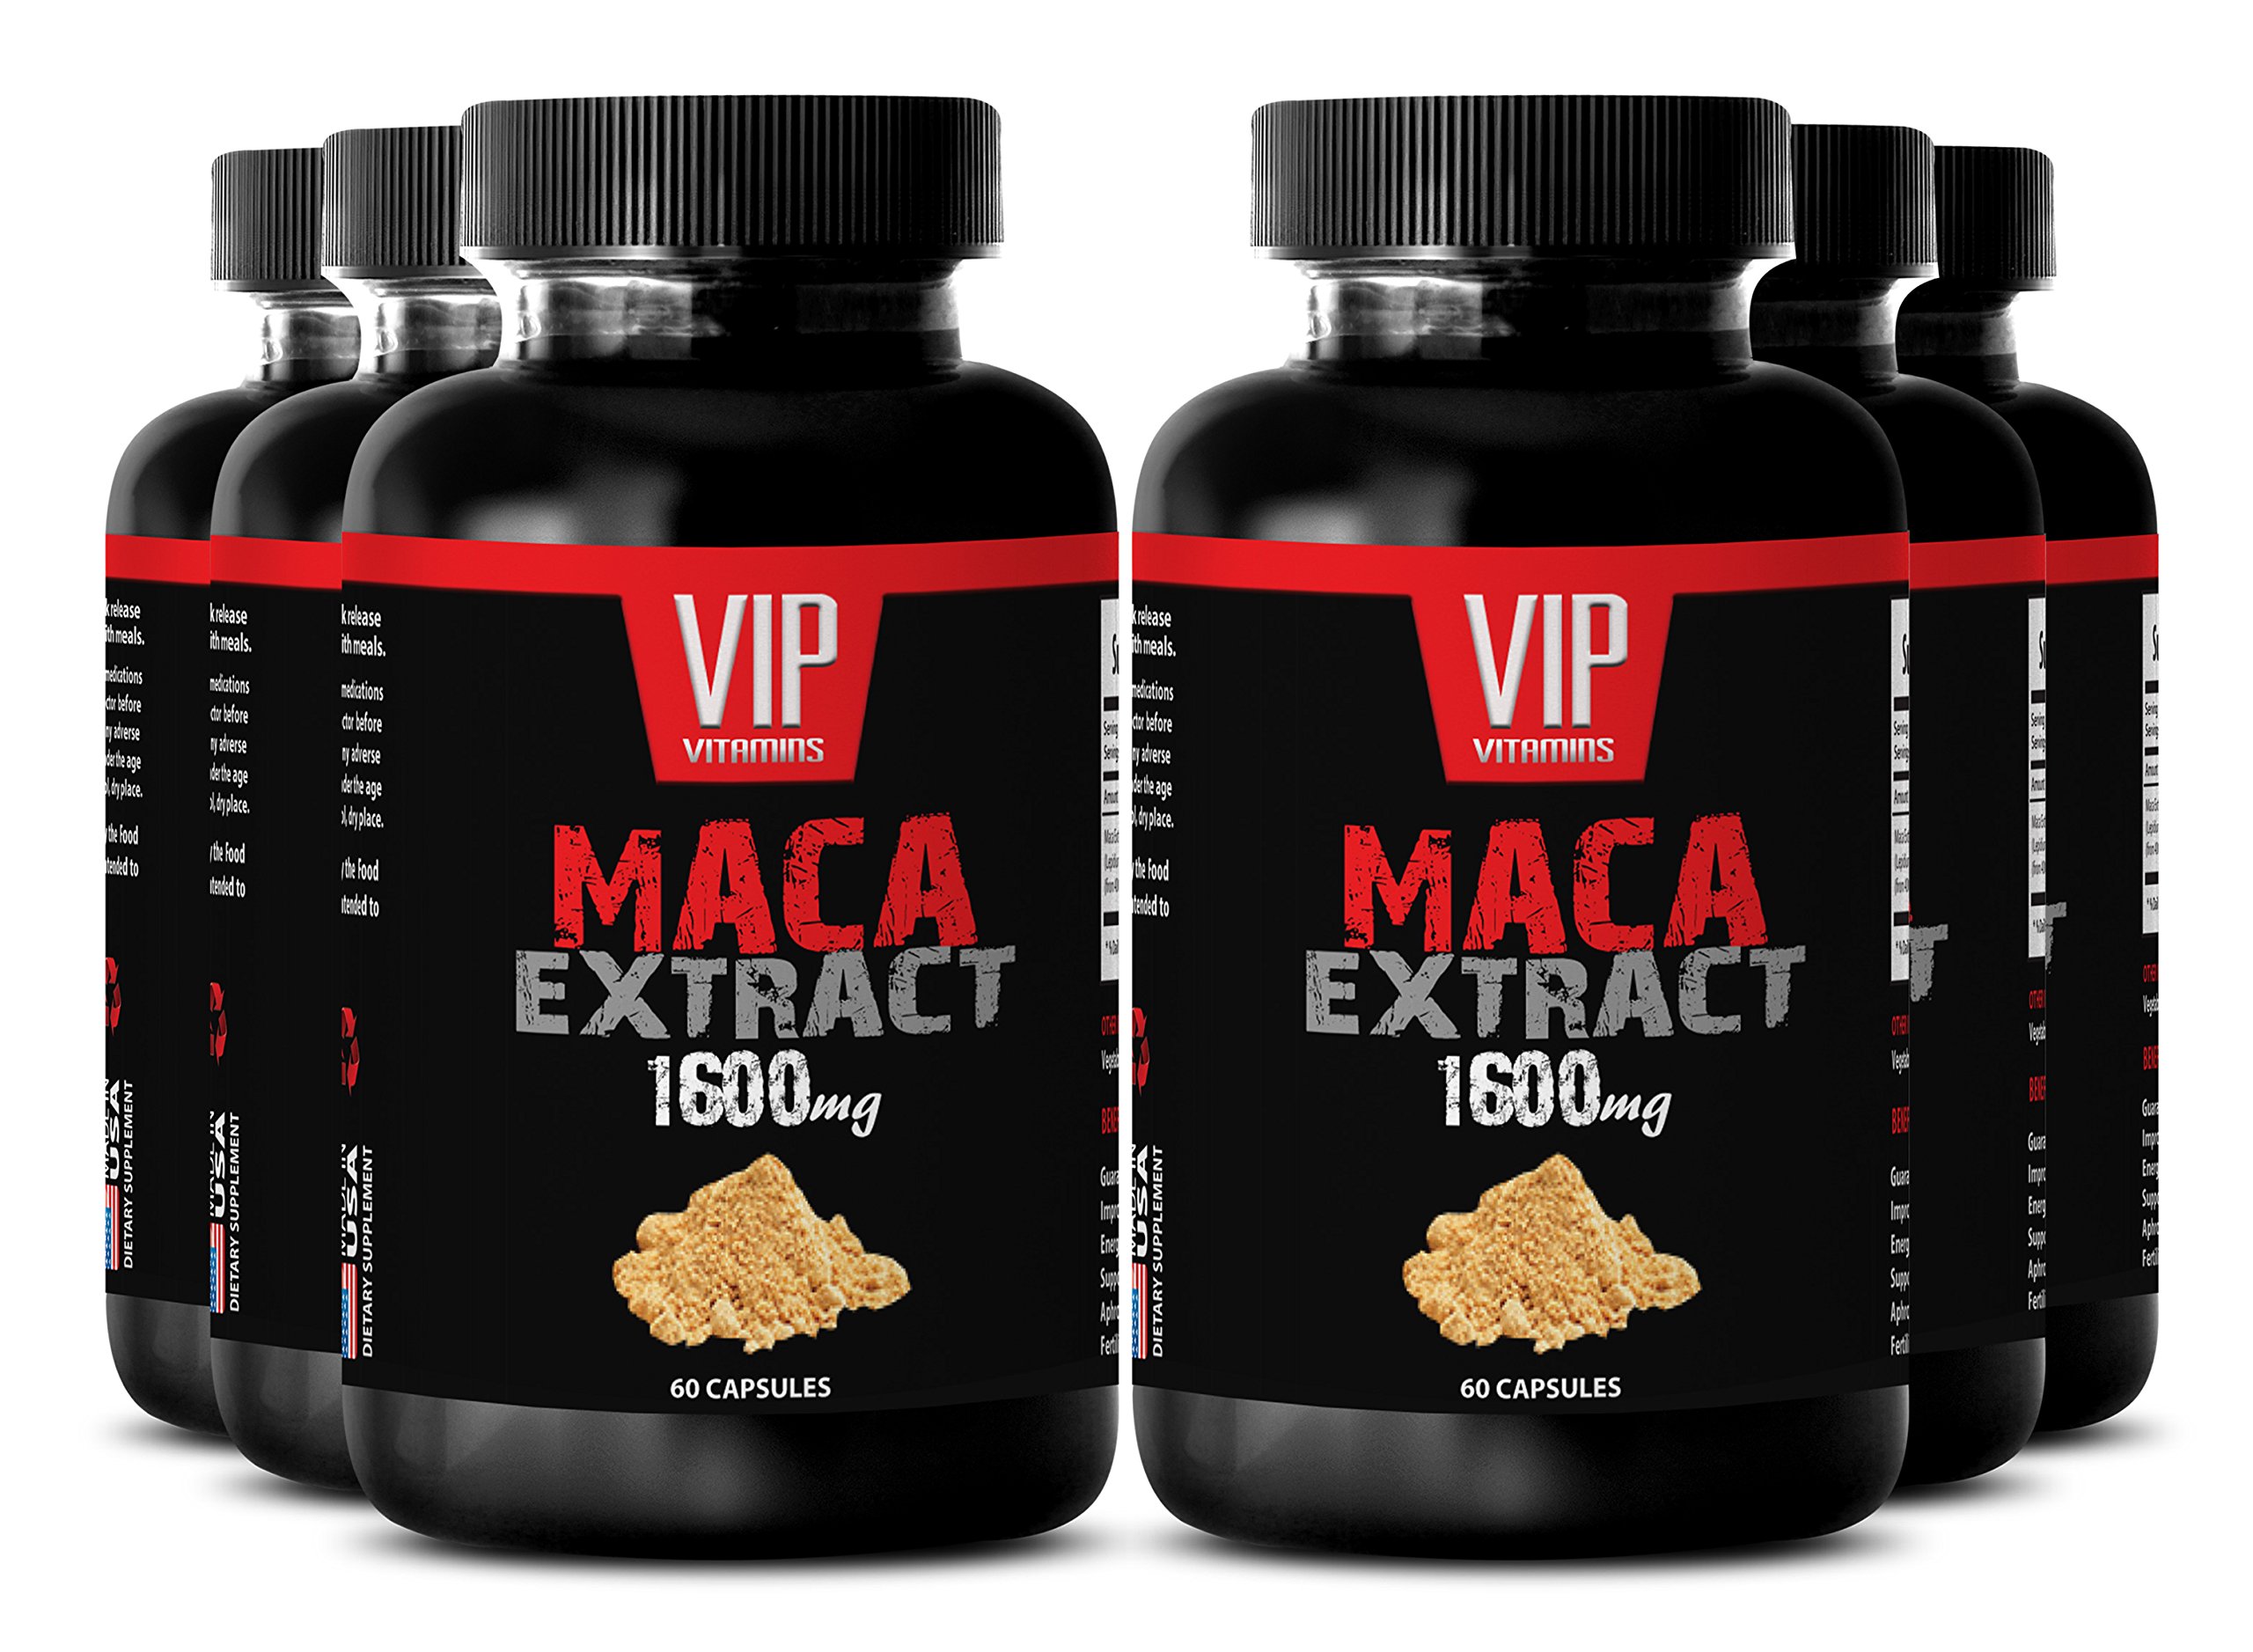 Maca Male Supplement - Maca 1600mg 4: 1 Extract - Increase in Sperm Production (6 Bottles 360 Capsules)